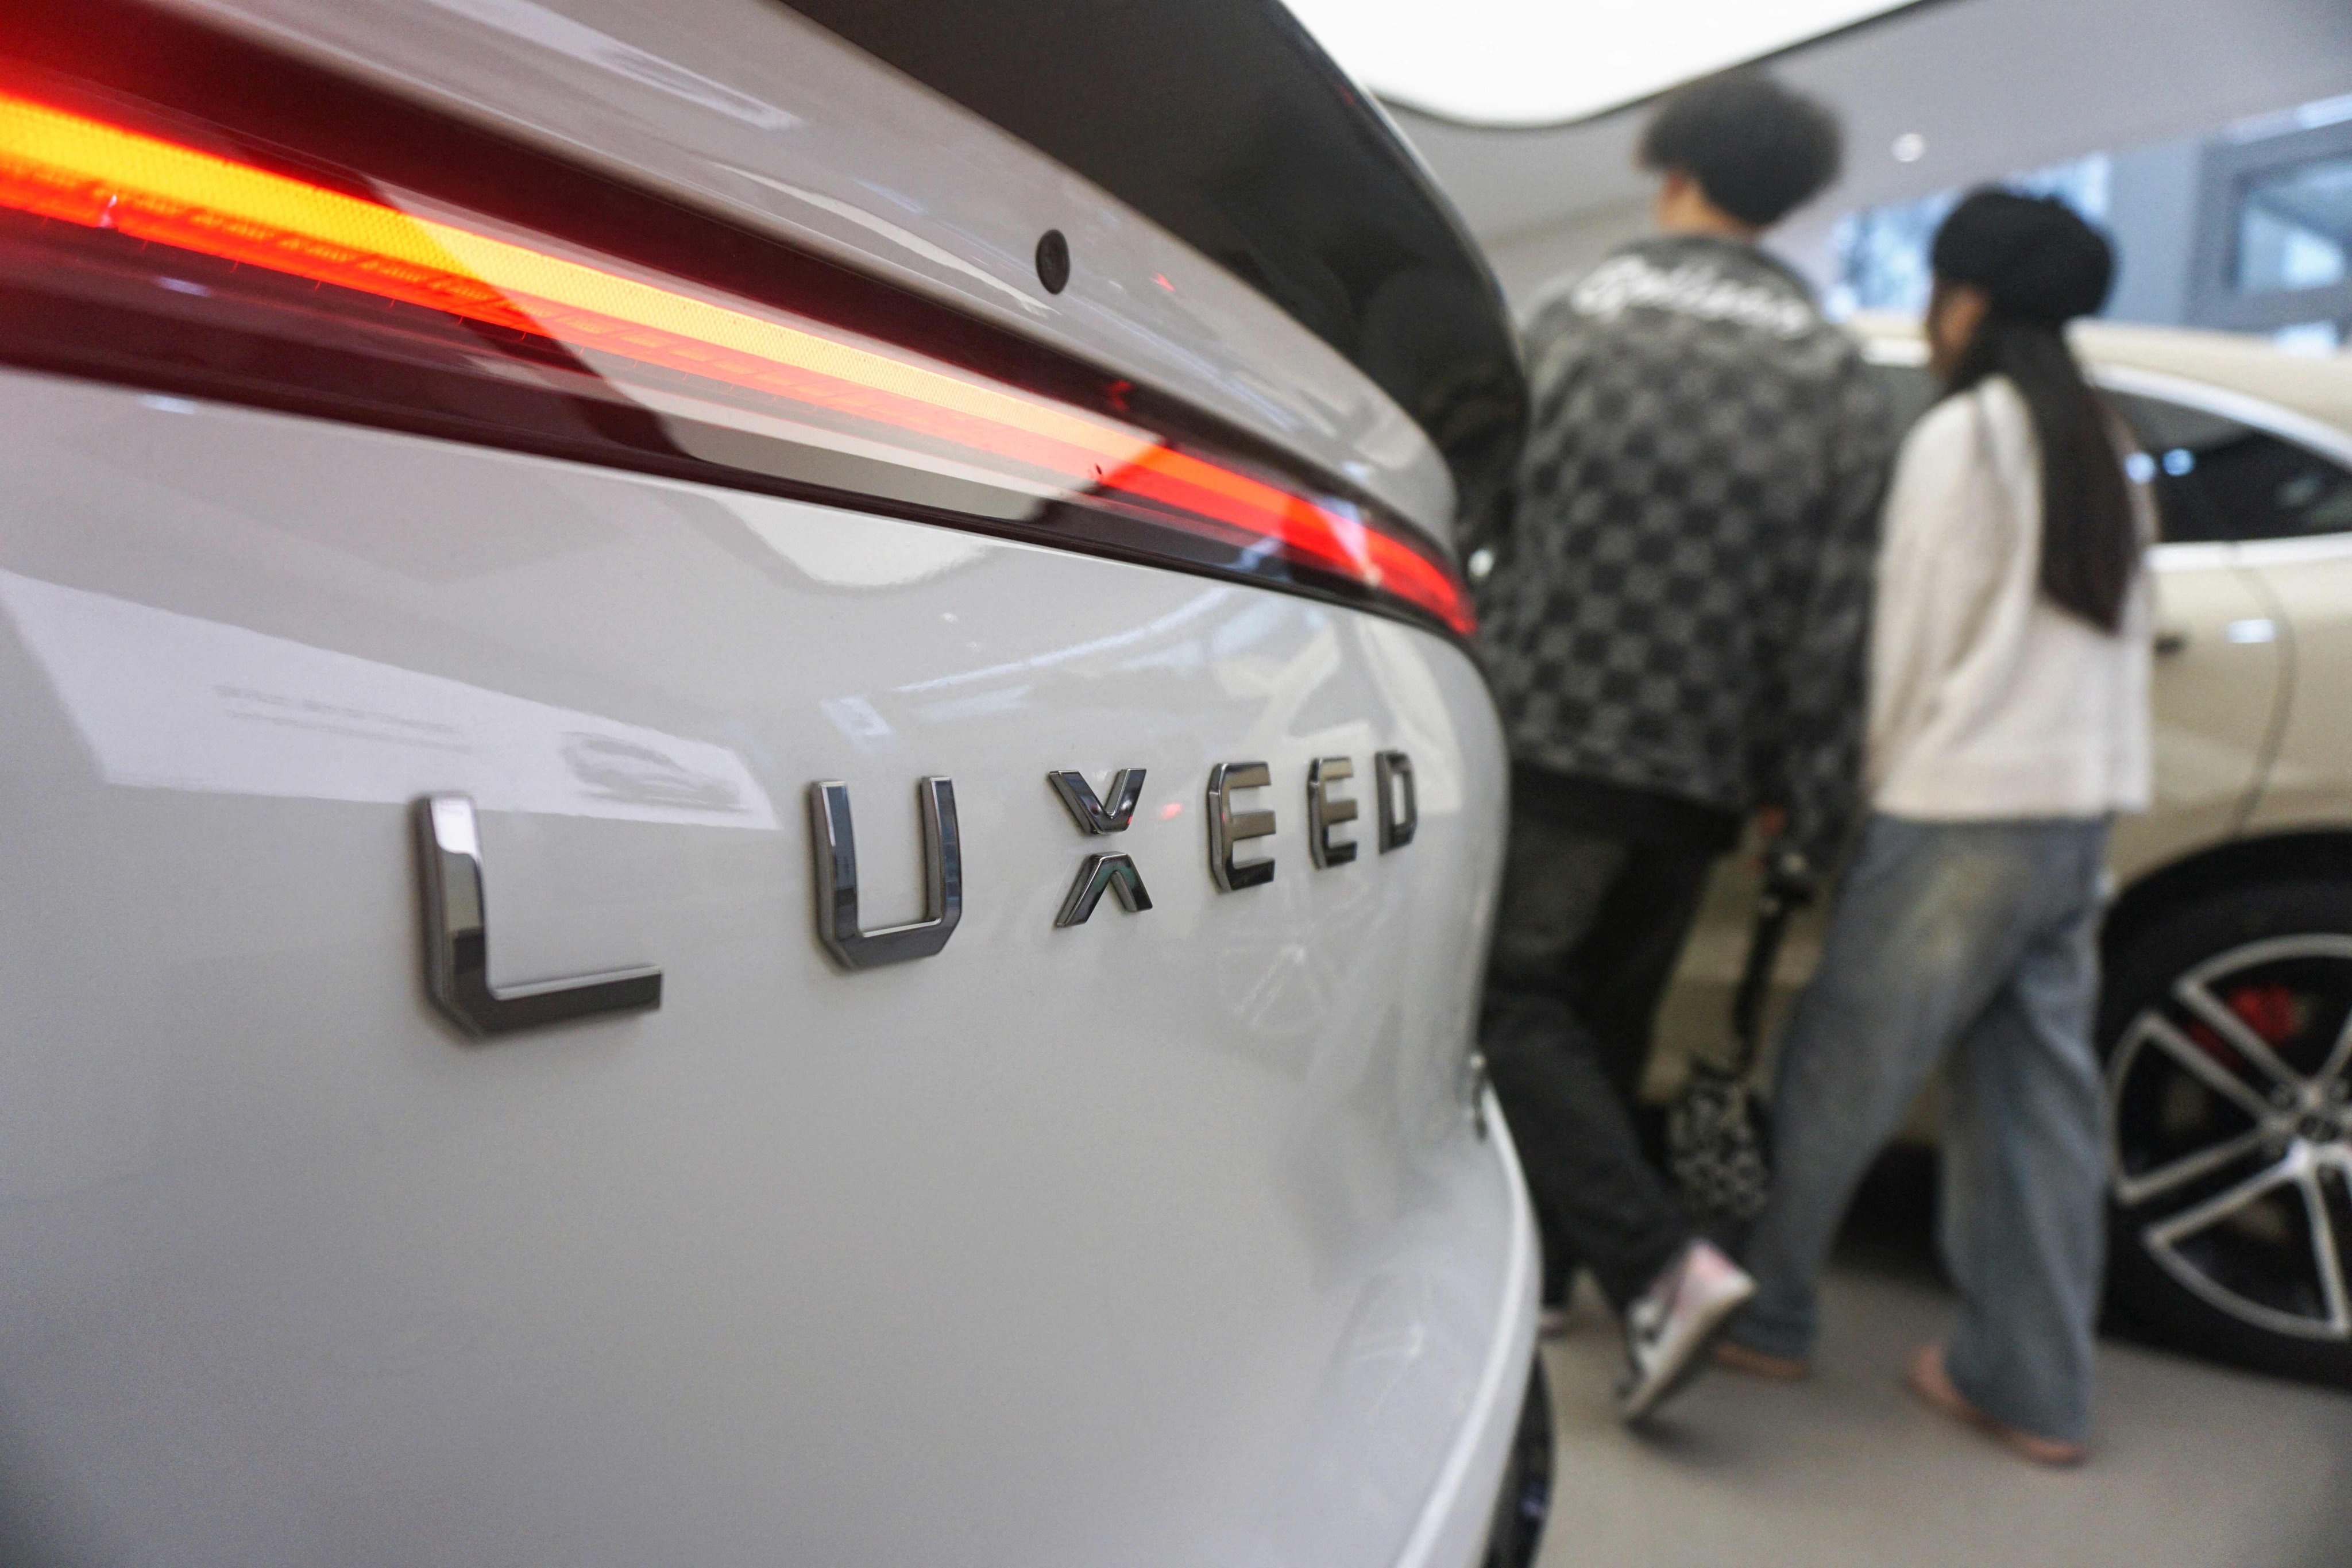 The S7 sedan – the first model for Chery Automobile’s Luxeed electric vehicle brand – is priced from US$34,600. Photo: AFP